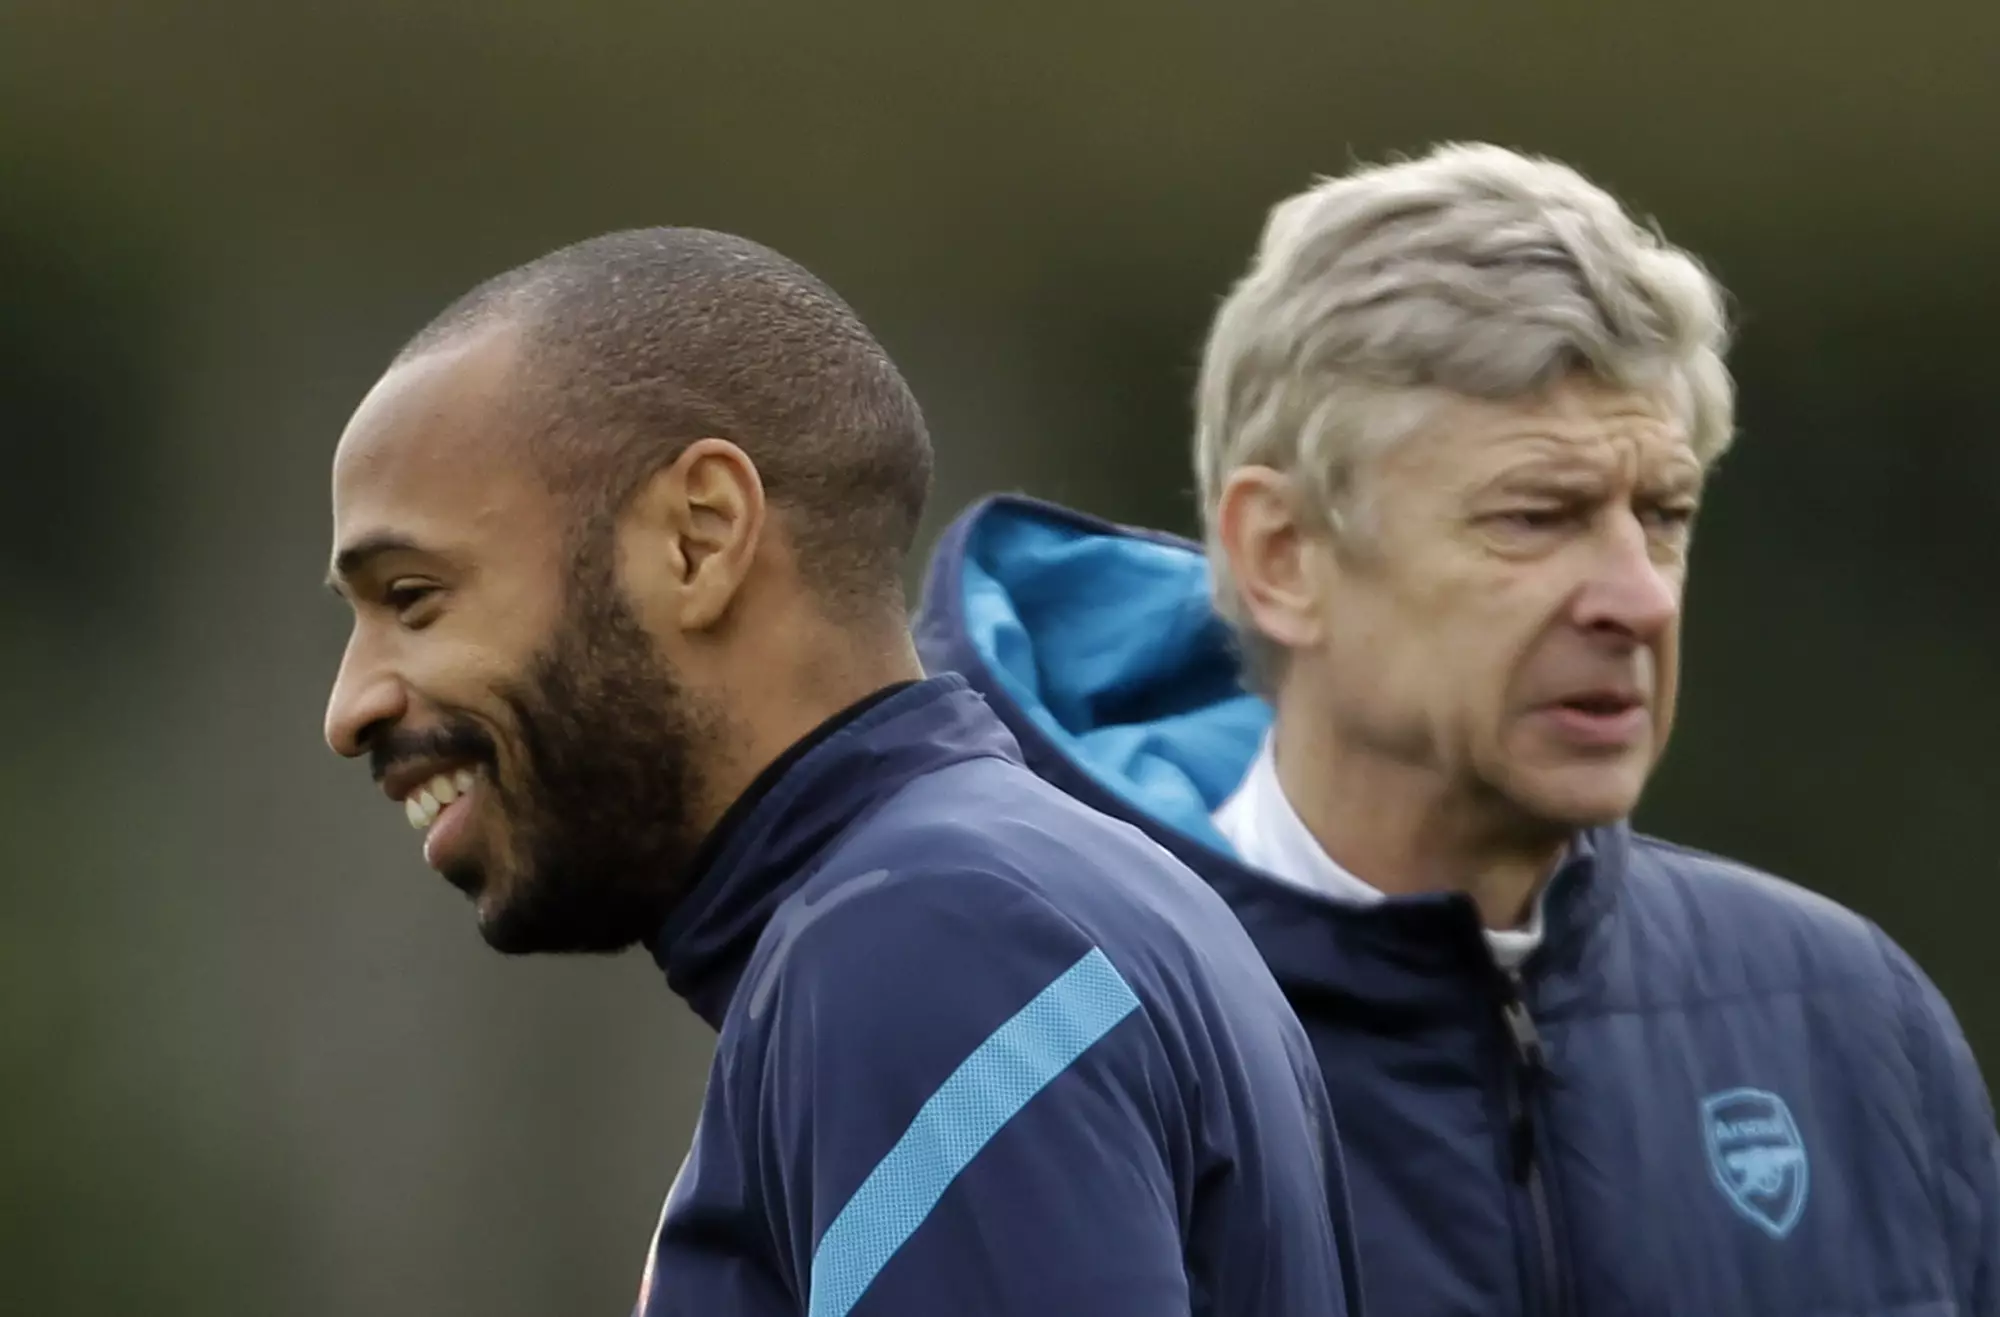 Thierry Henry Quits Arsenal After Row With Arsene Wenger